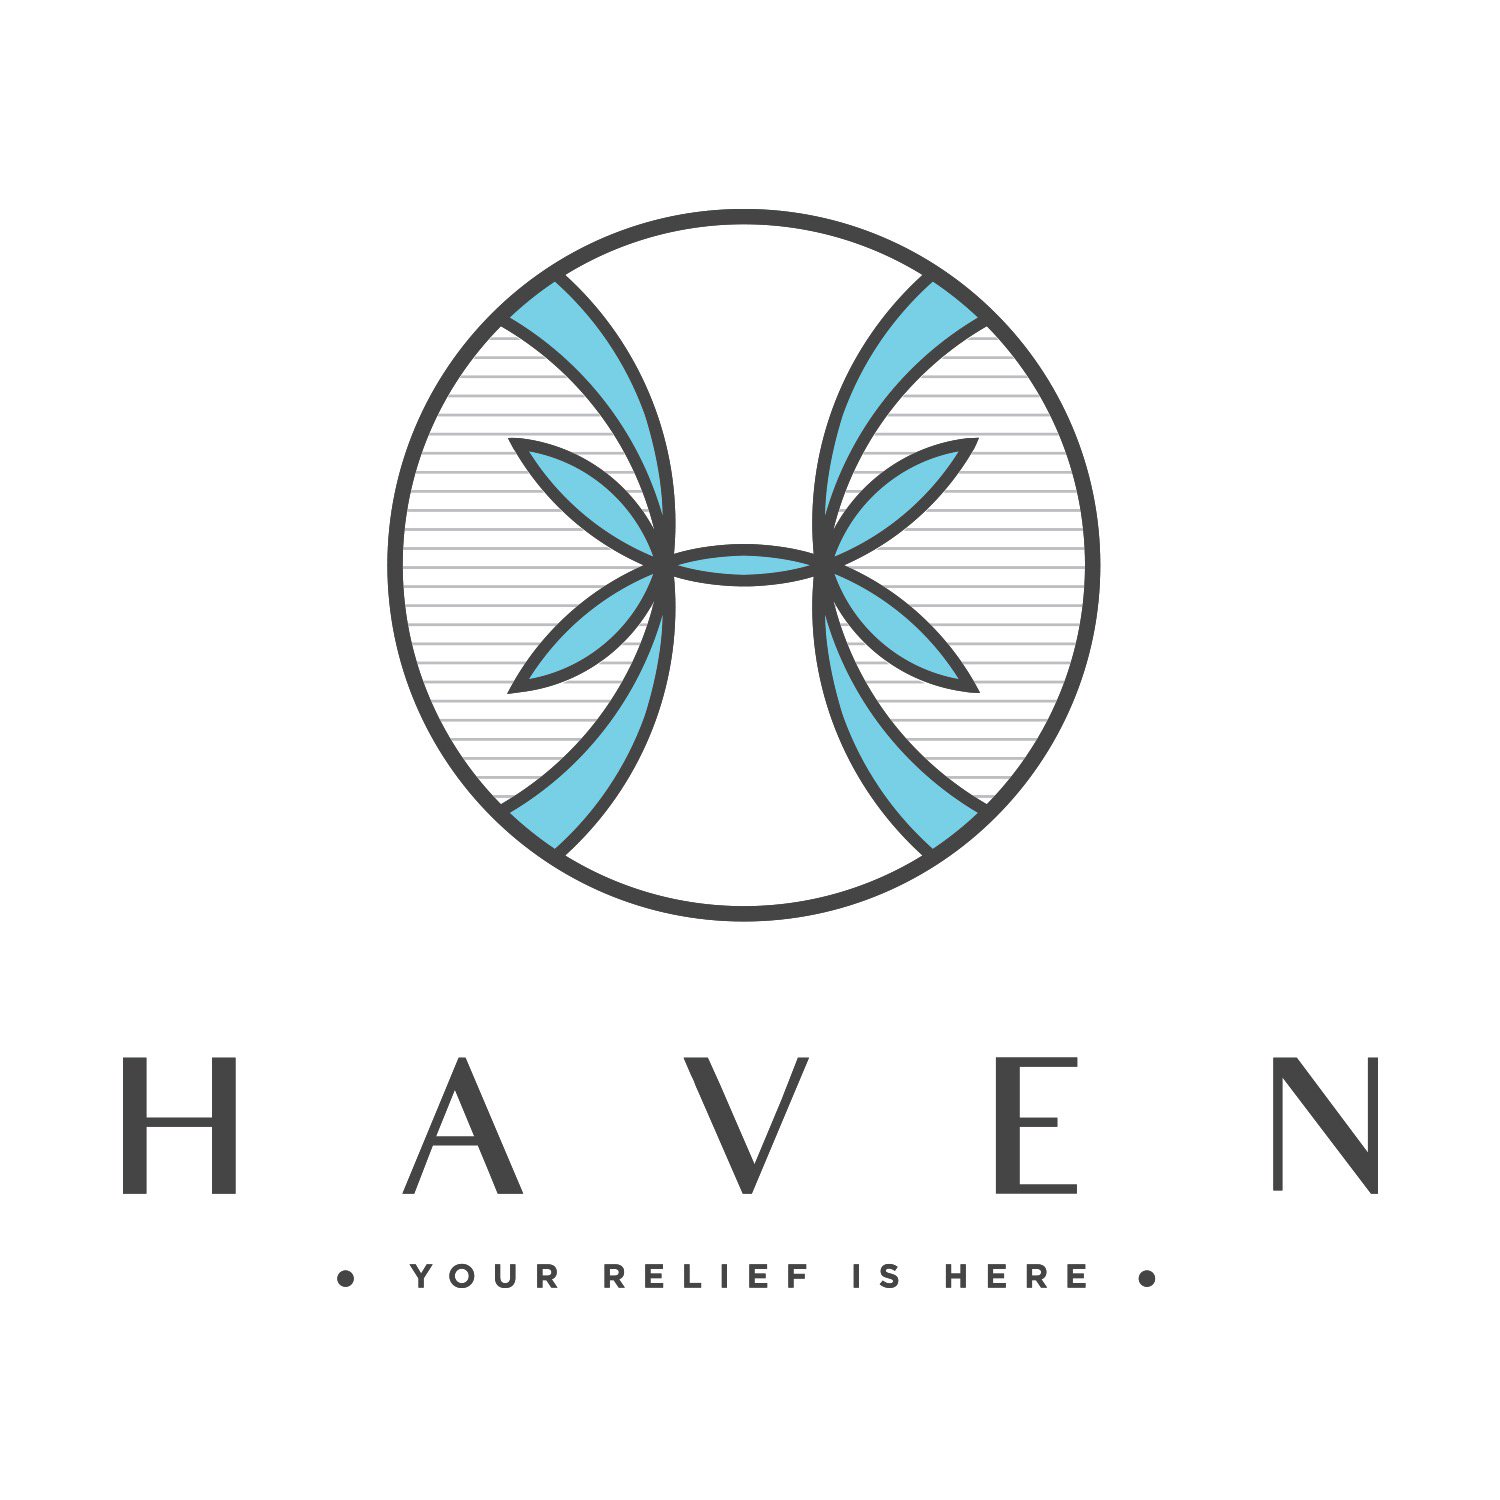 Located in Brandywine Maryland. A person must be at least 18+ years old to view this content. Medical cannabis use is for certified patients only.
IG: @HAVEN_MD